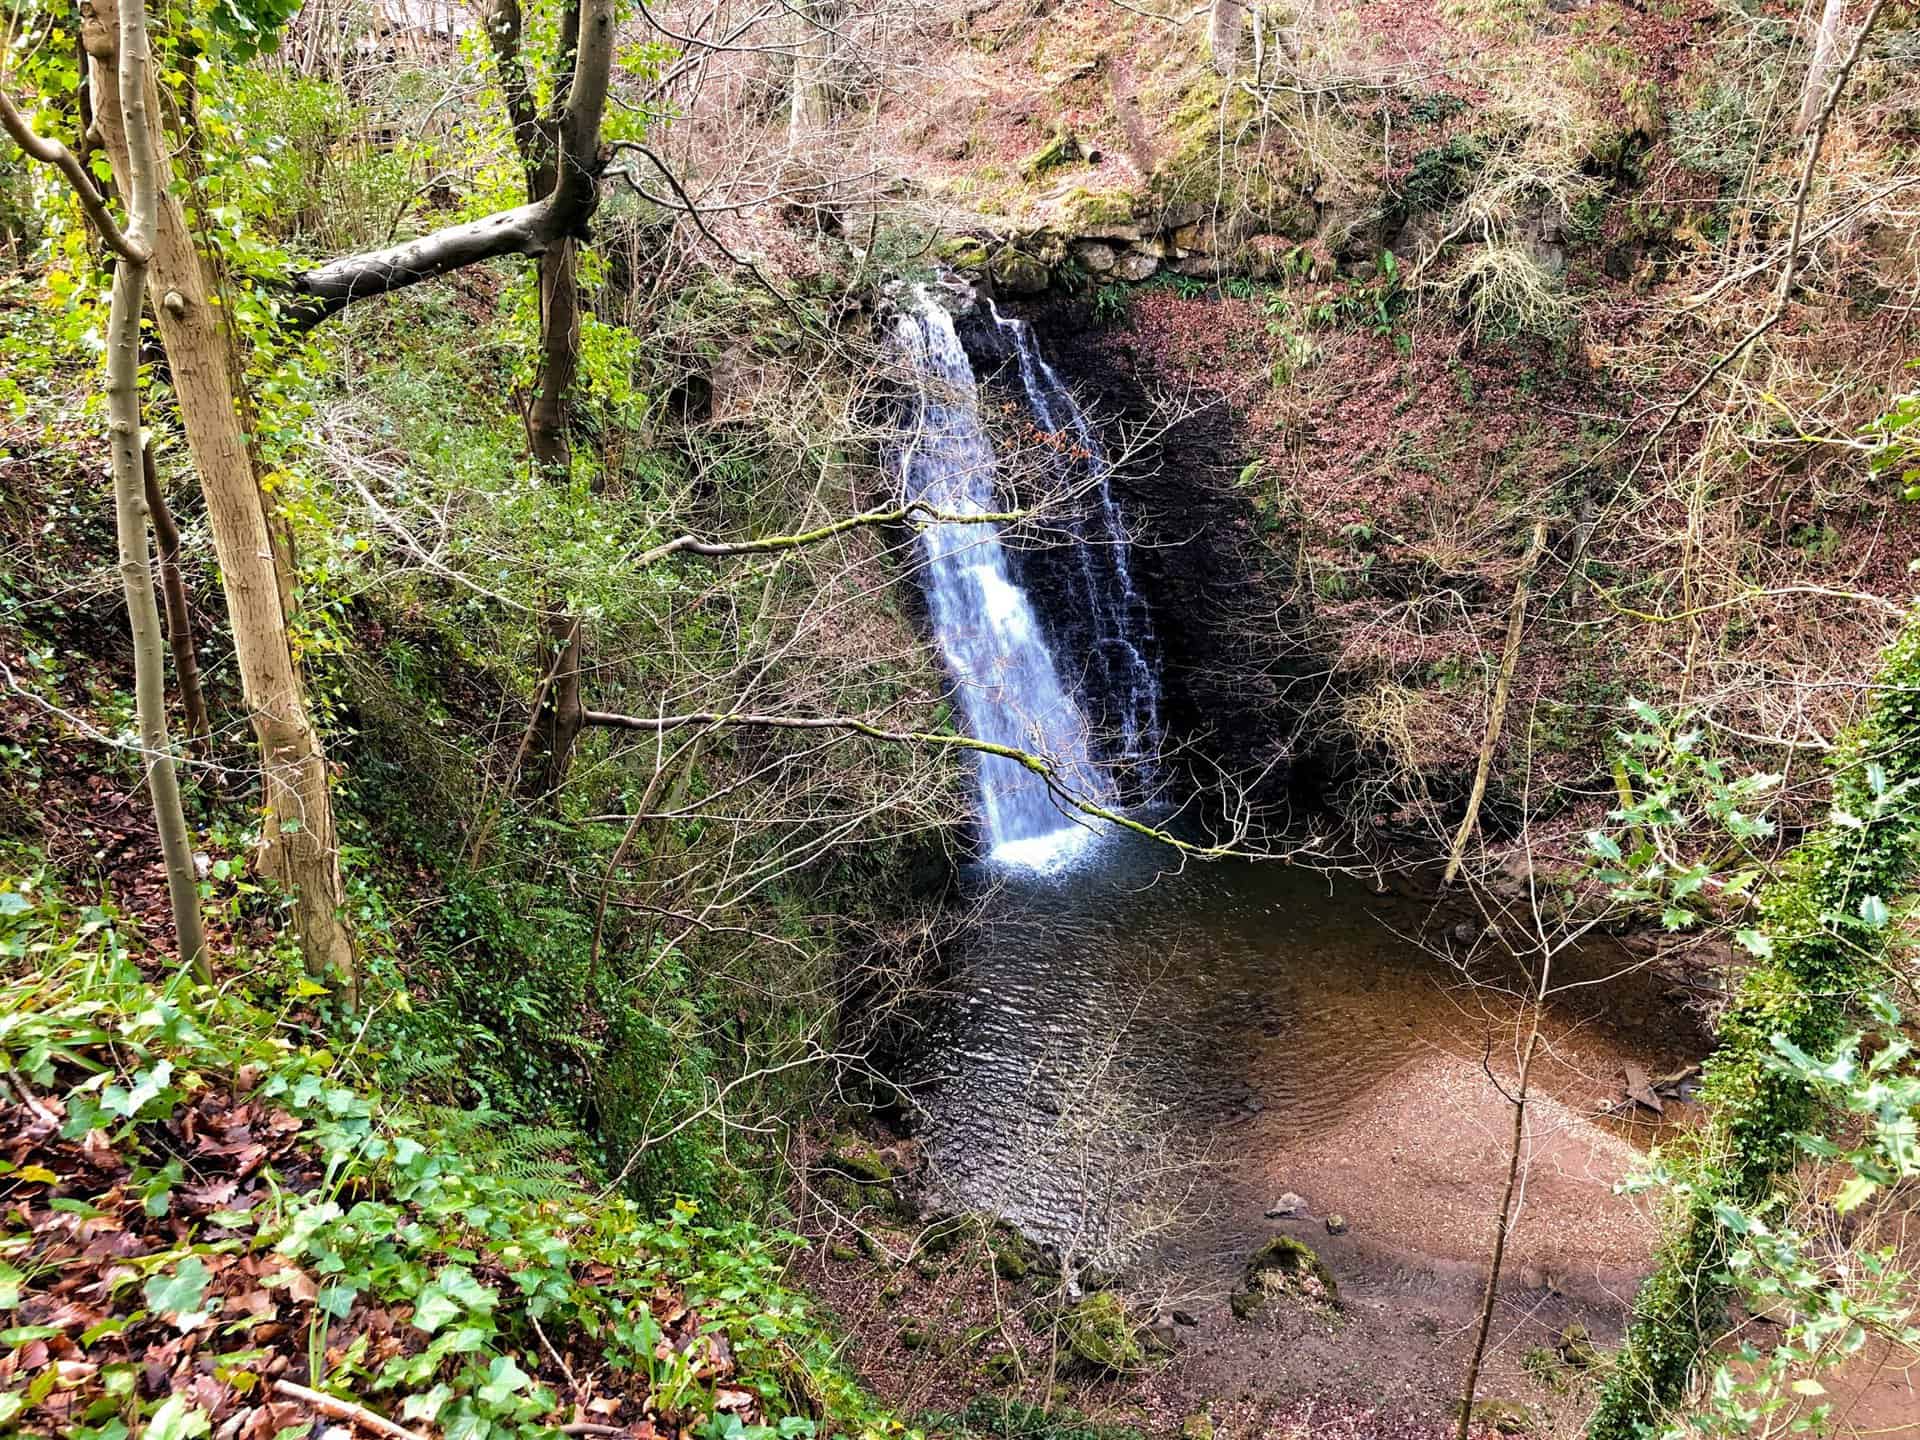 The route's spectacle: the 30-foot Falling Foss waterfall.